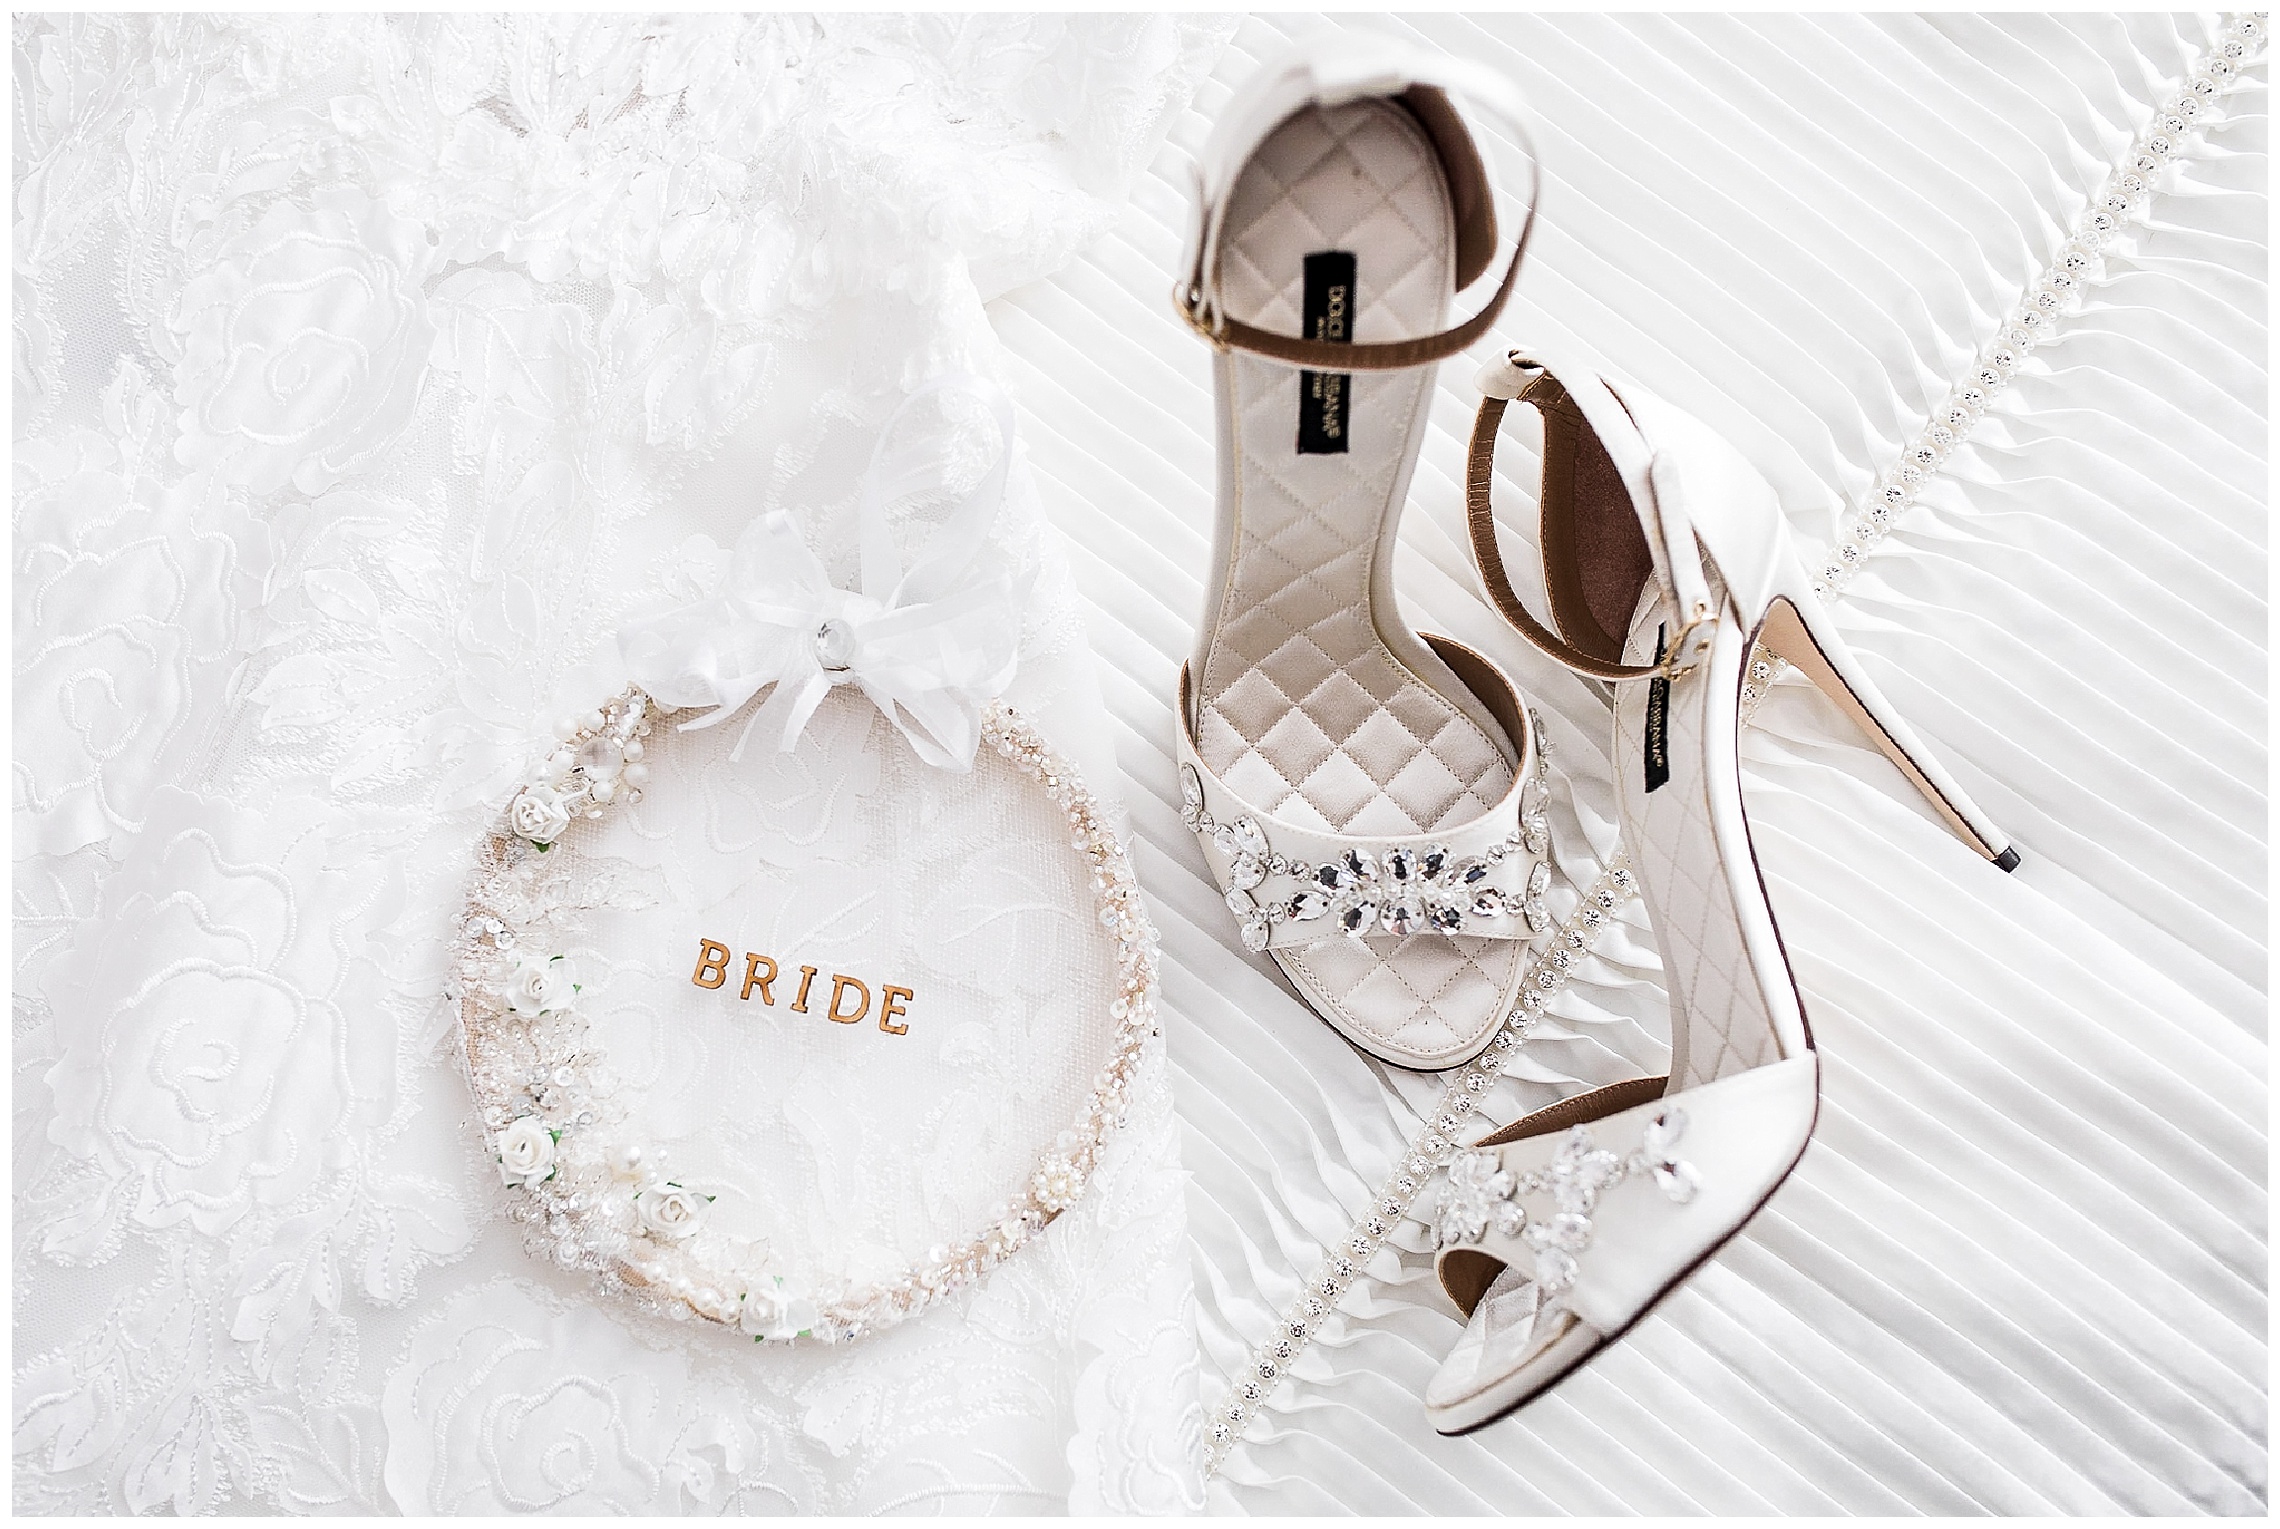 white dolce and gabbana bridal shoes with straps and diamanté details, on a while bed next to a bride decoration